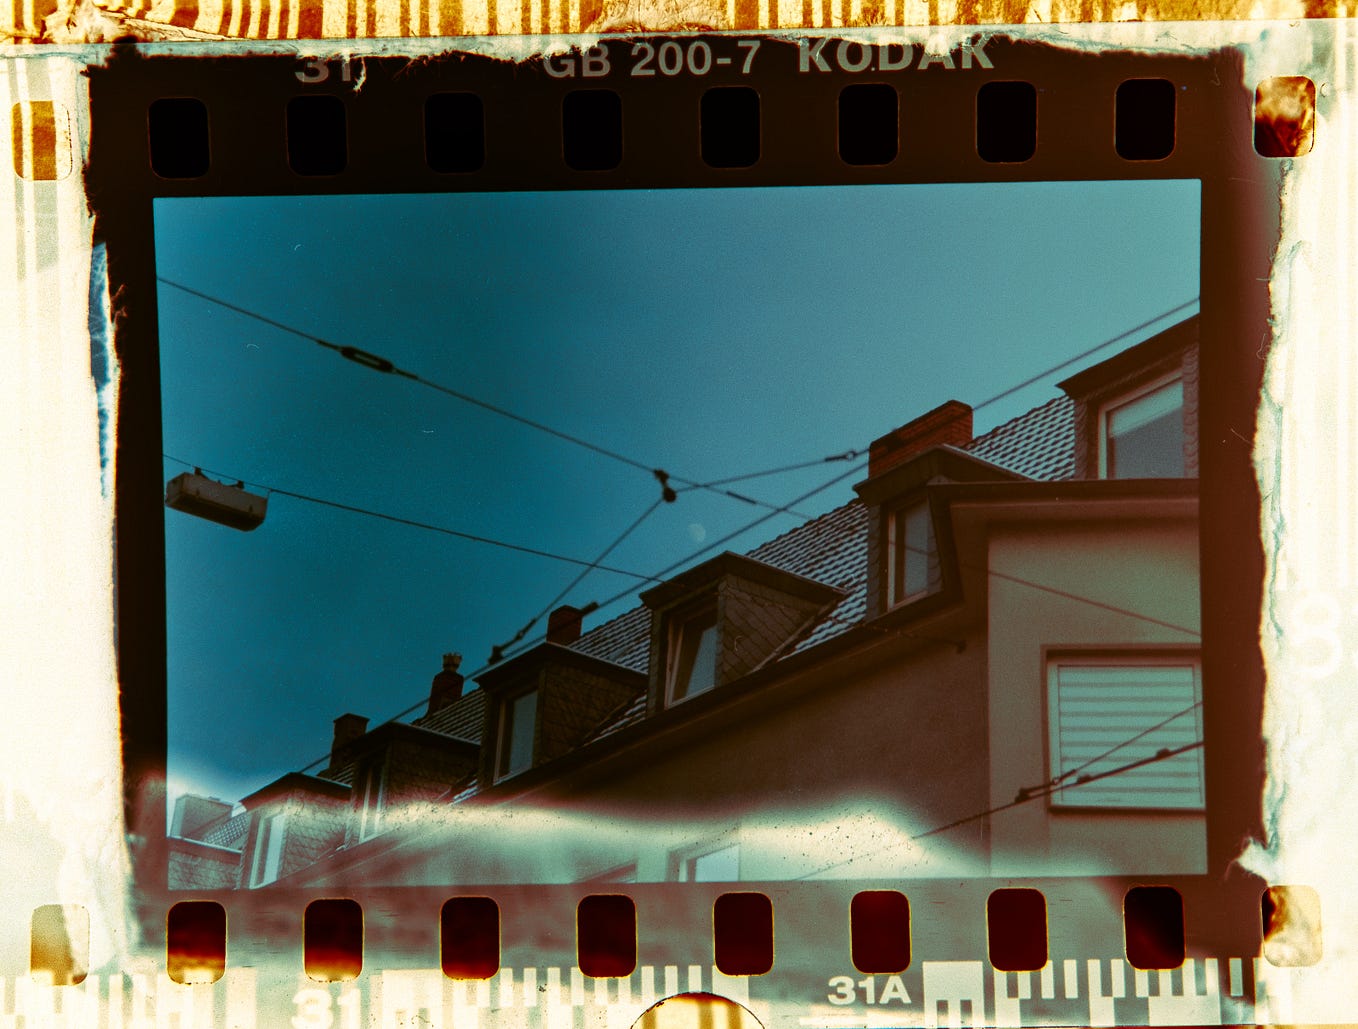 The Undiscovered Beauty of Film Photography: See the World in a New (old) Way